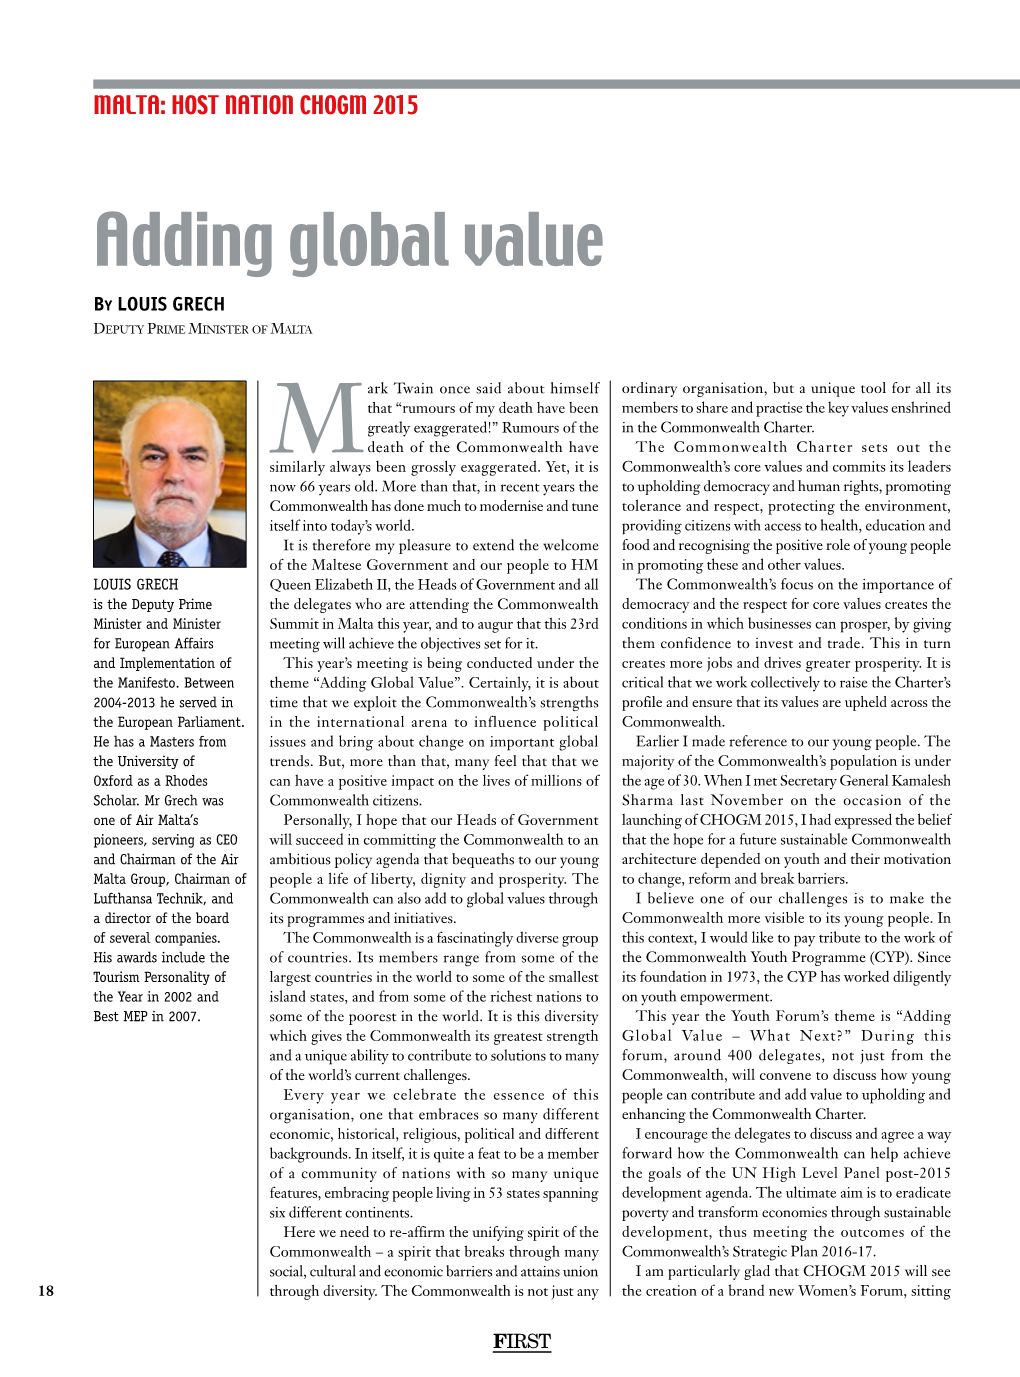 Adding Global Value by LOUIS GRECH Deputy Prime Minister of Malta